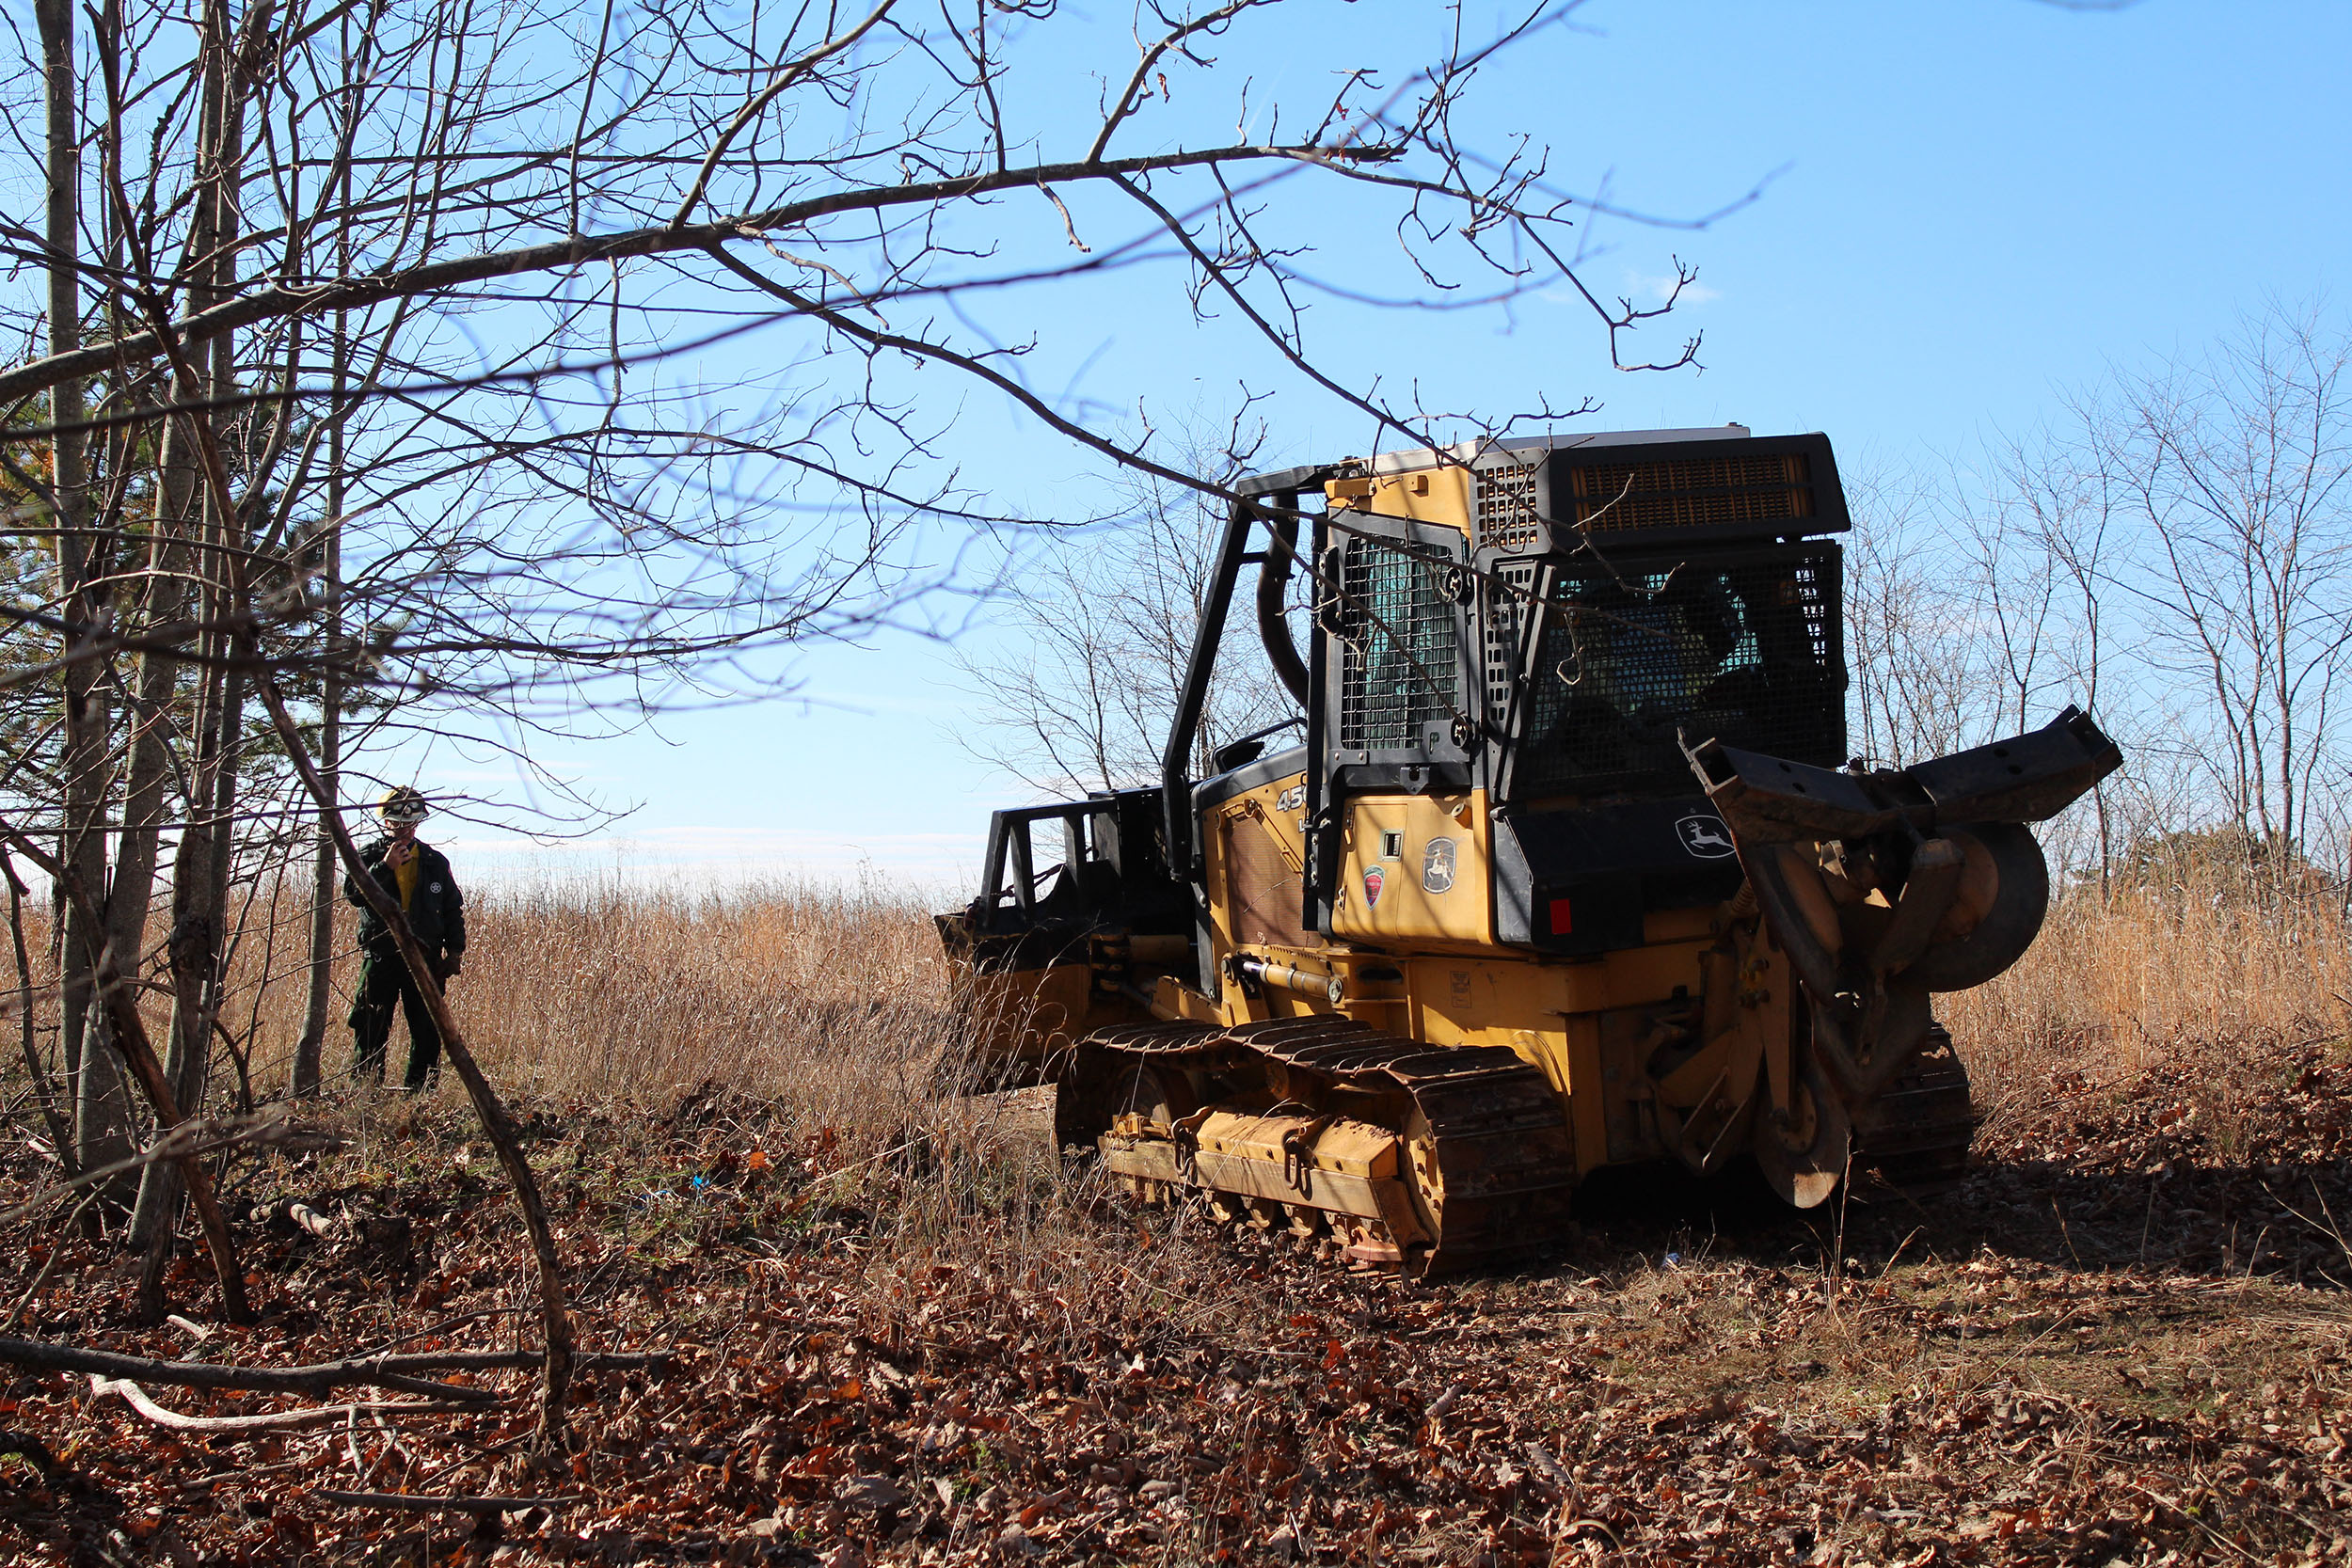 A bulldozer was used to clear the fire line